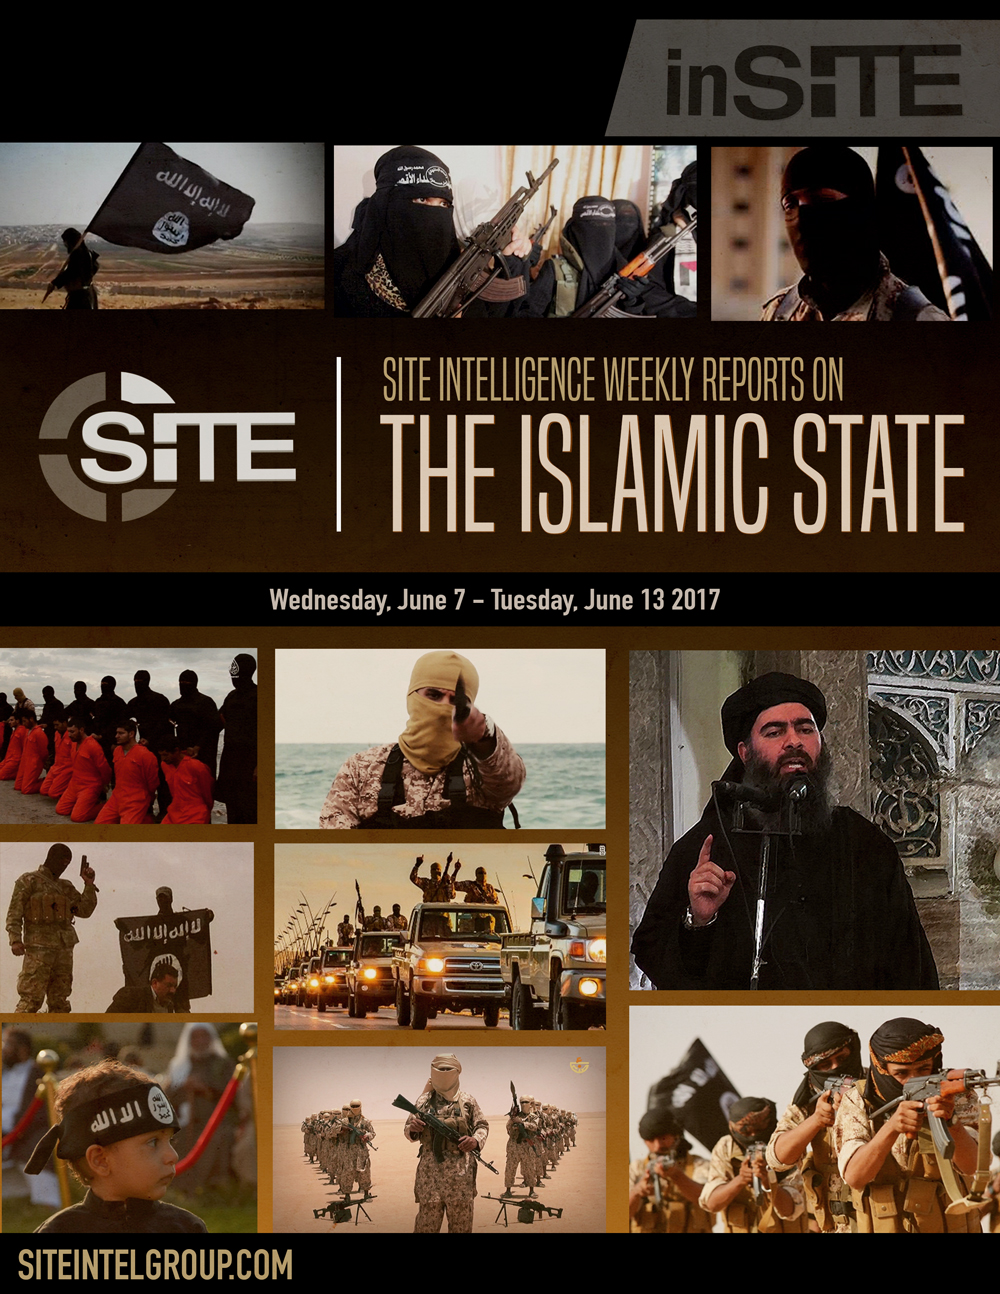 Weekly inSITE on the Islamic State, August 9 - 15, 2017